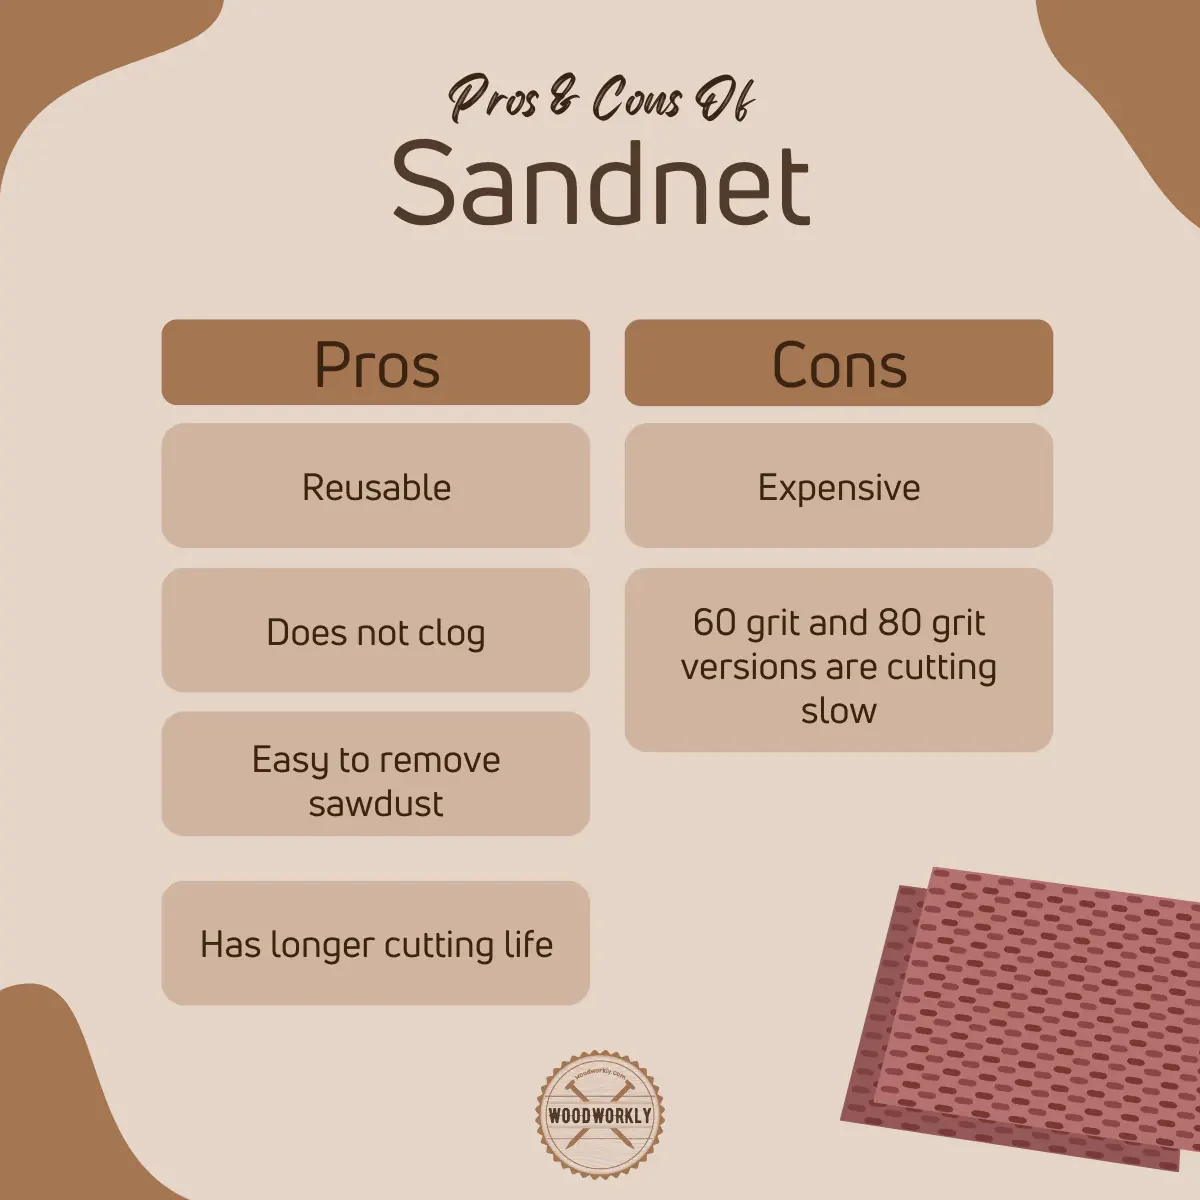 pros and cons of sandnet